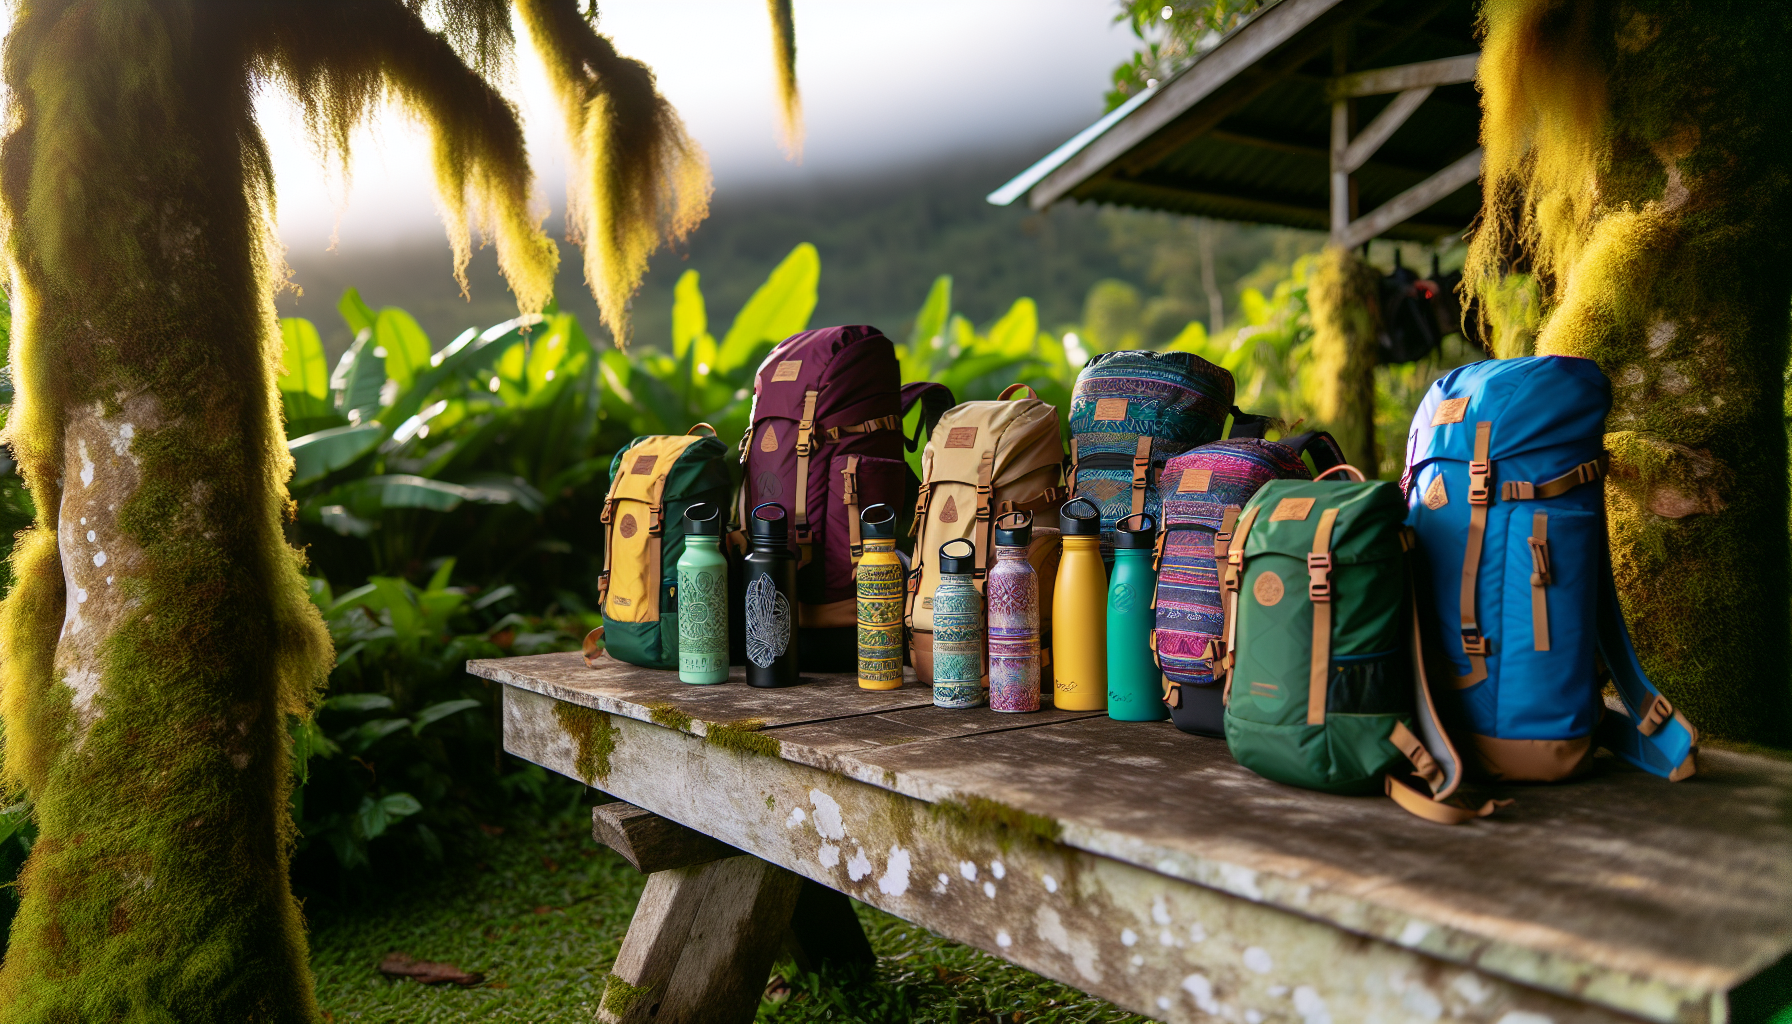 Personalized hiking gear including backpacks and water bottles for adventure-themed retreats